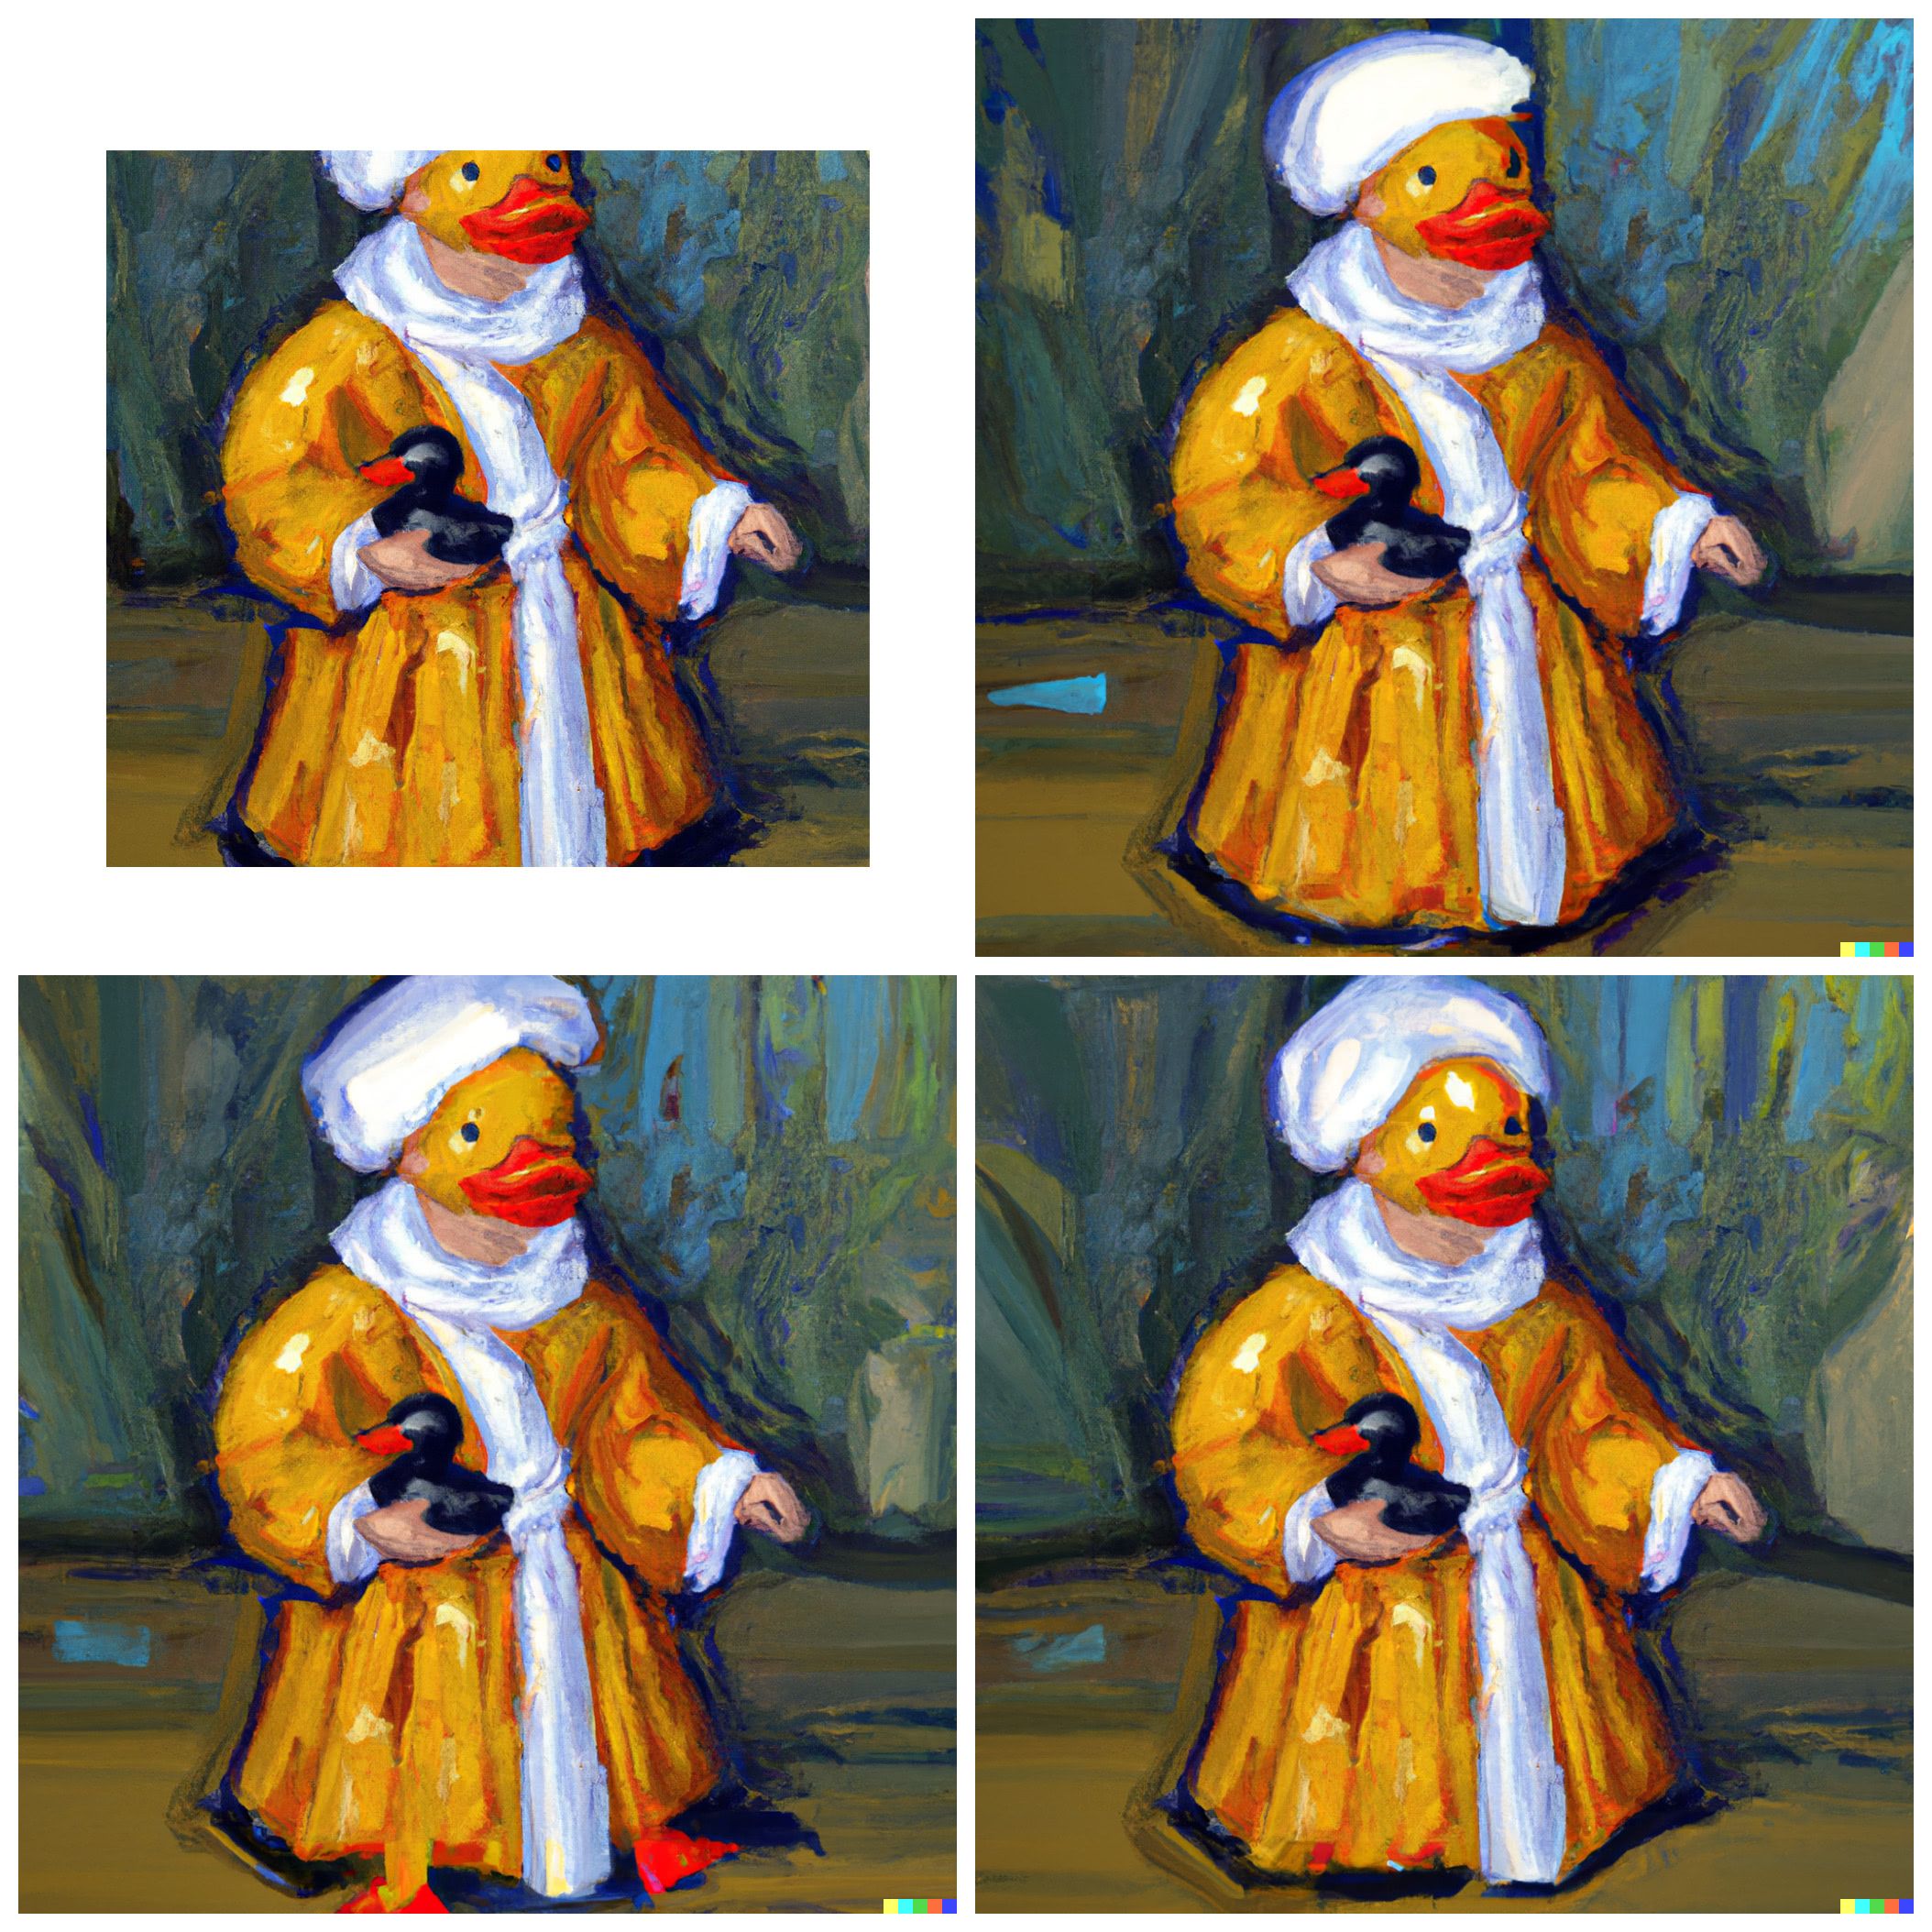 An oil painting of a rubber duck wearing medieval robe by Van Gogh (‘Inpainting’)